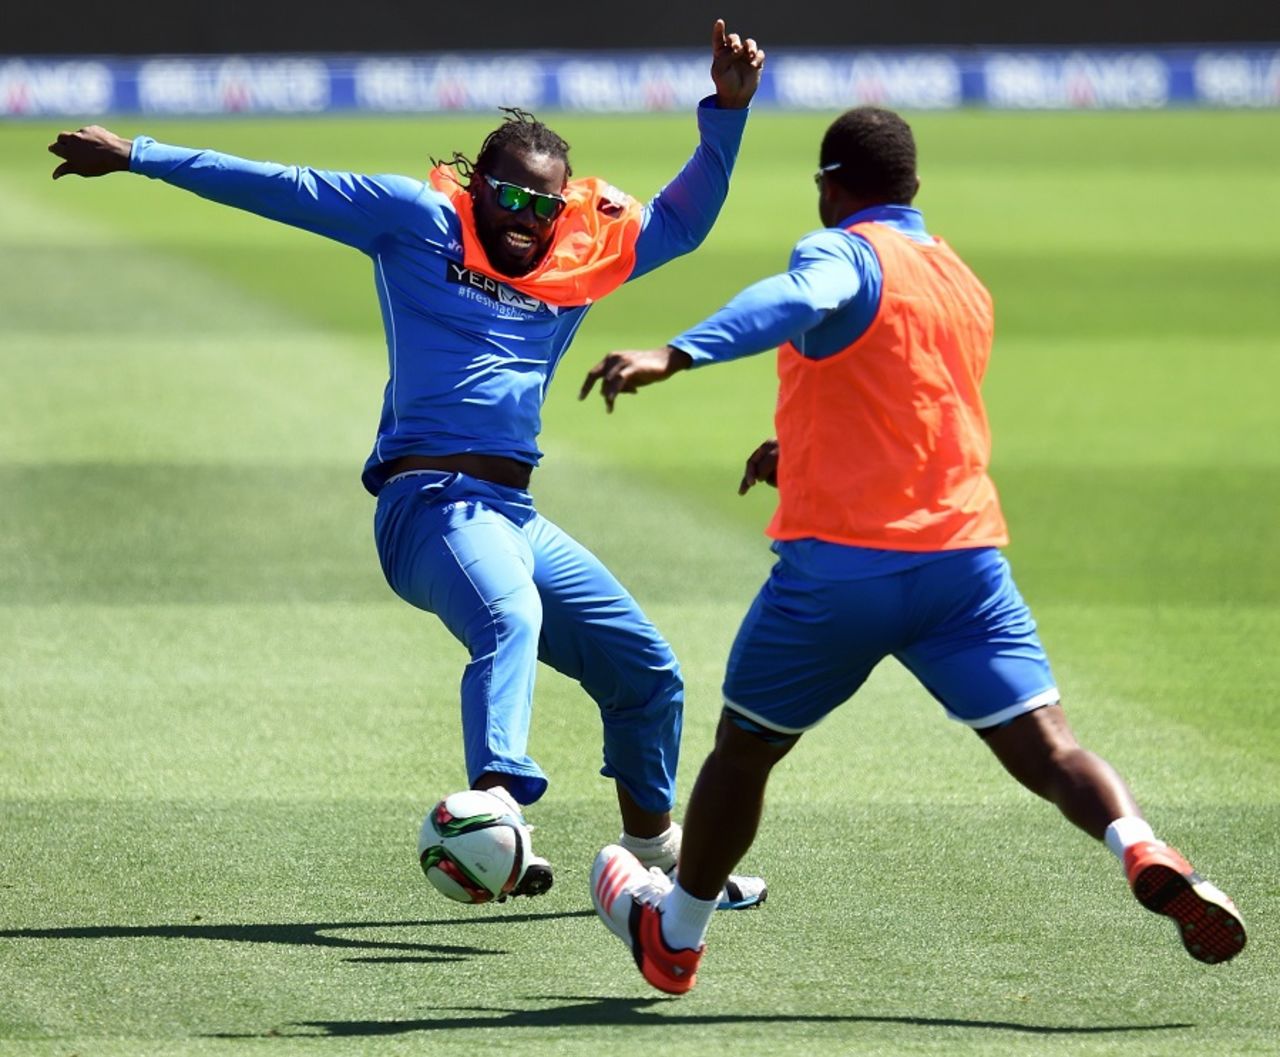 Chris Gayle and Dwayne Smith show off their football skills, Christchurch, February 20, 2015